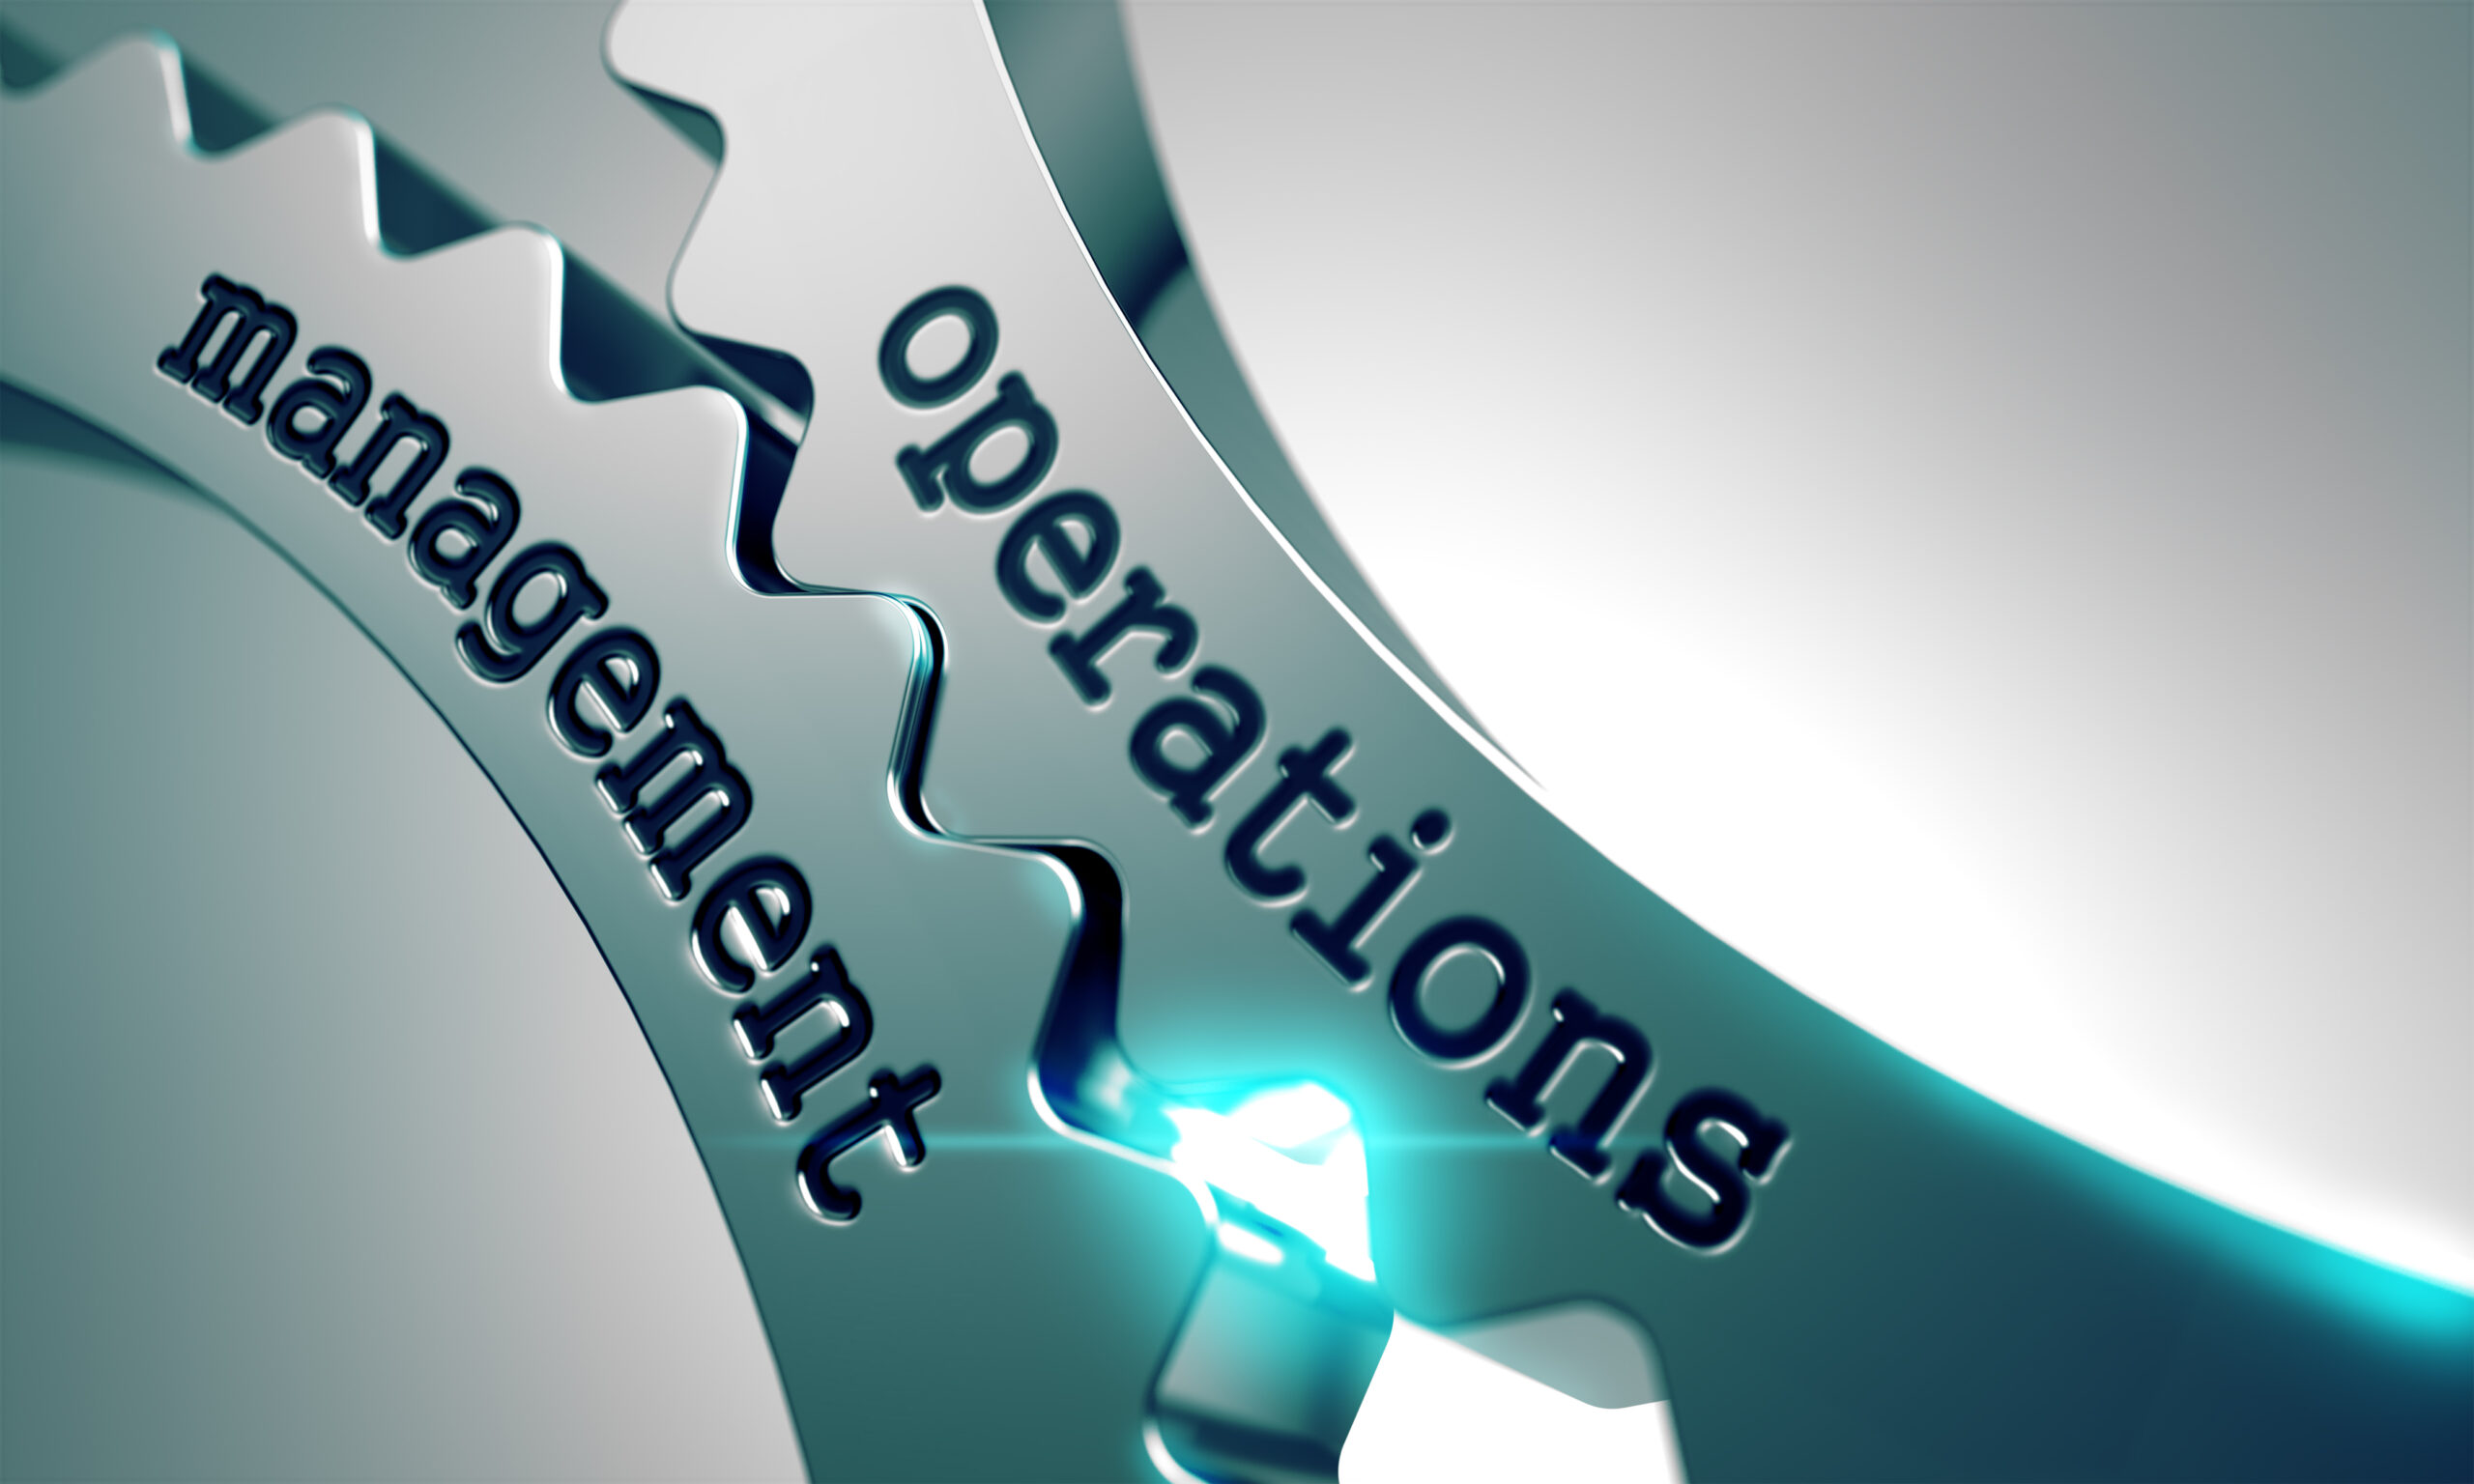 Operations and management gears 